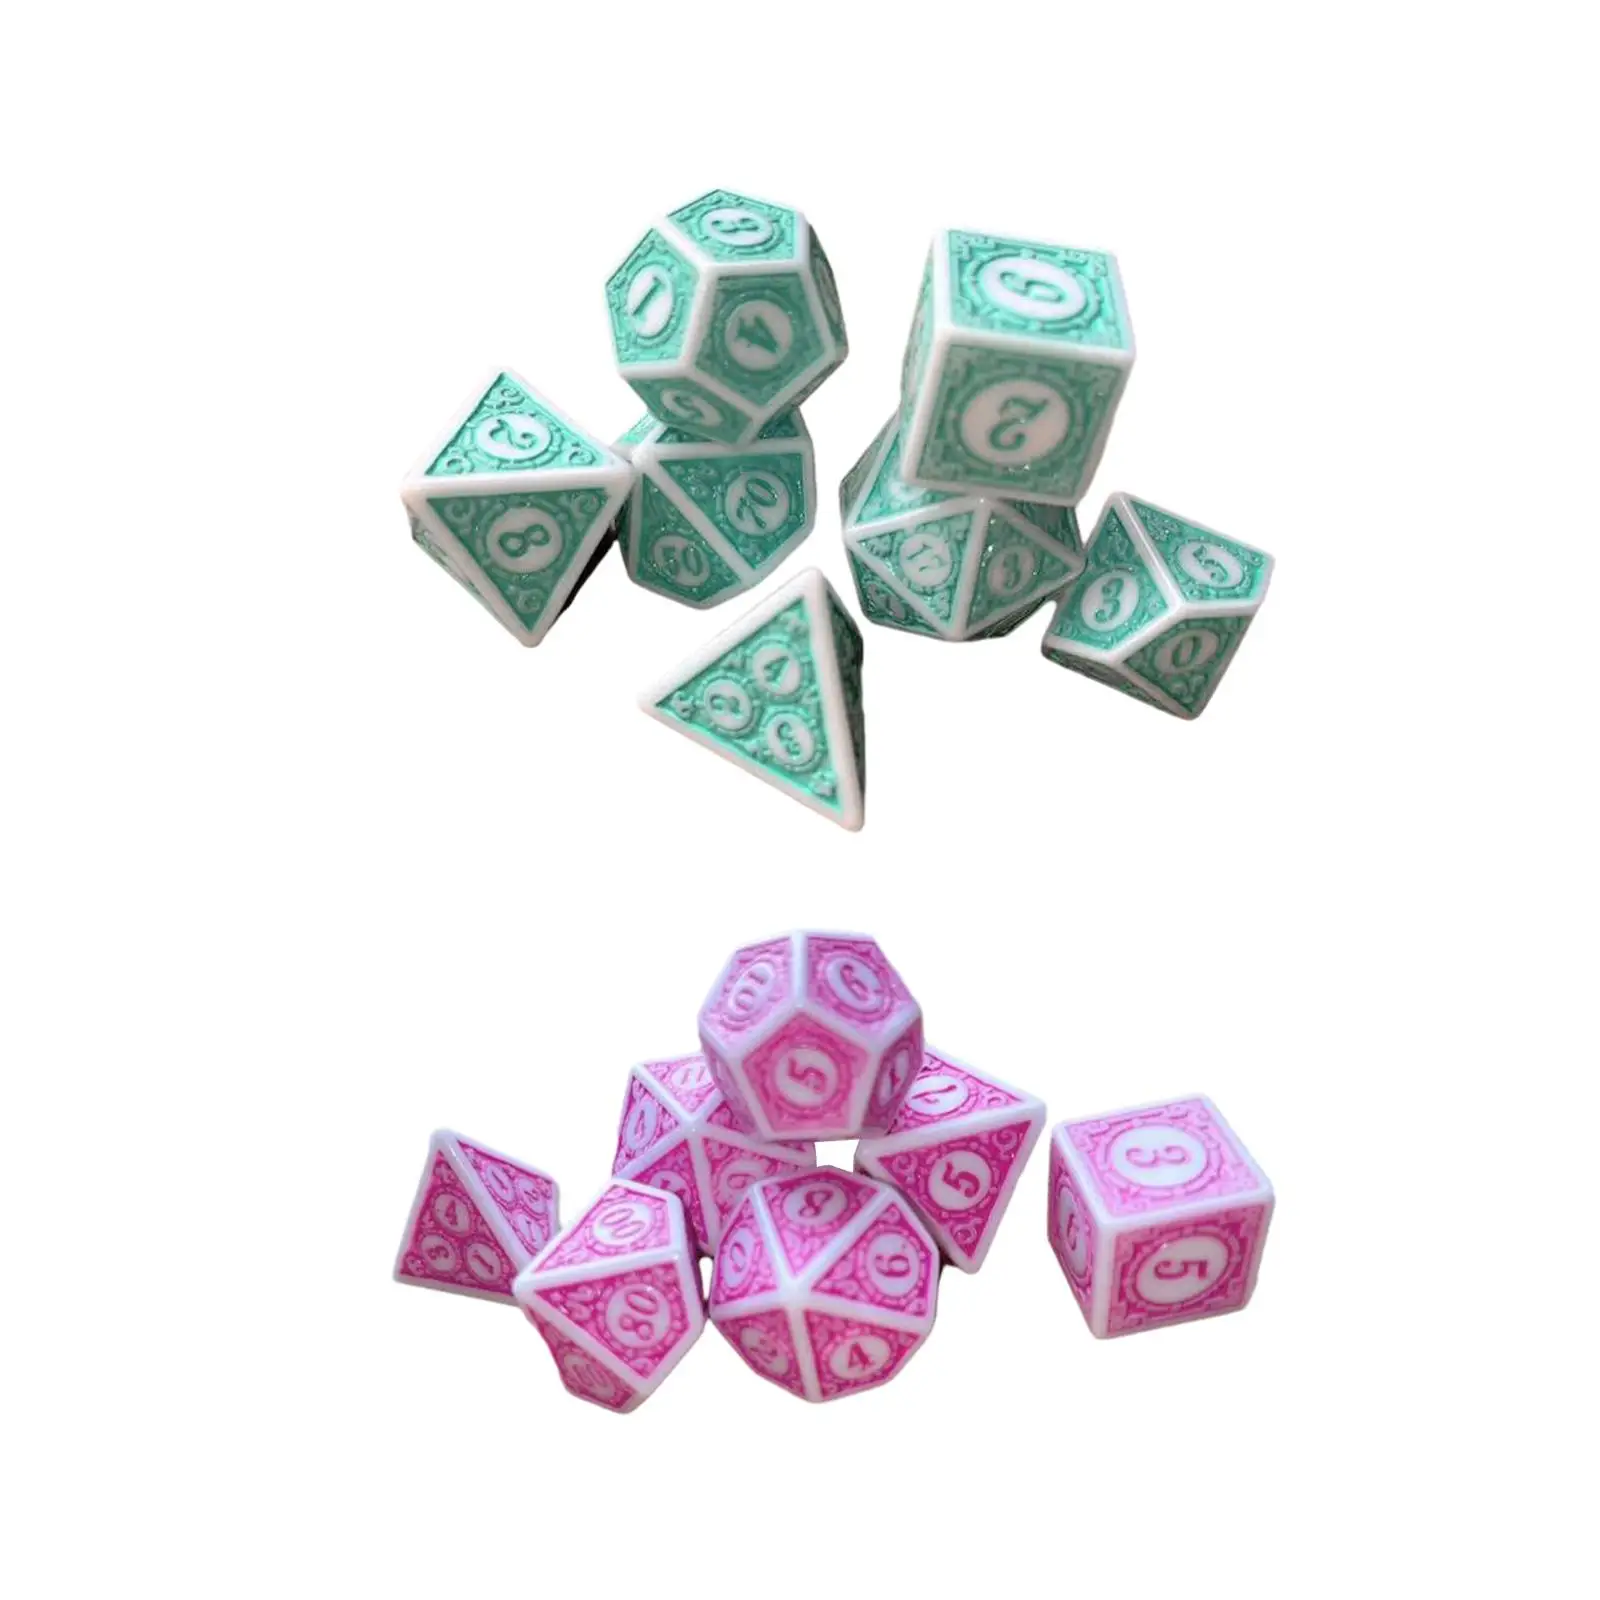 7 Pieces Game Dices Set Party Favors Polyhedral Dices for KTV Bar Table Game